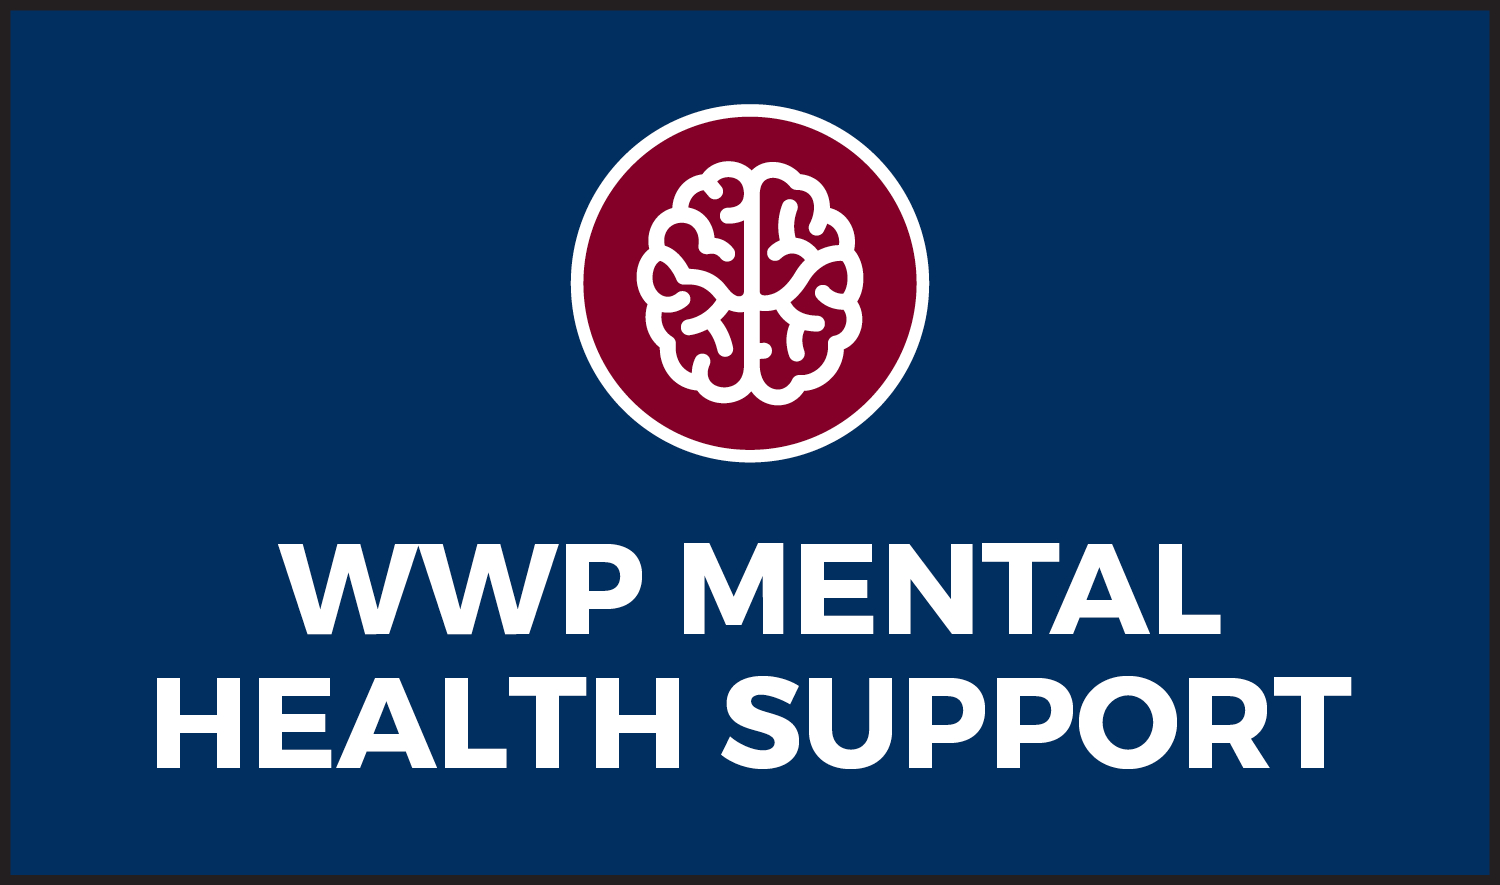 WWP Mental Health Support